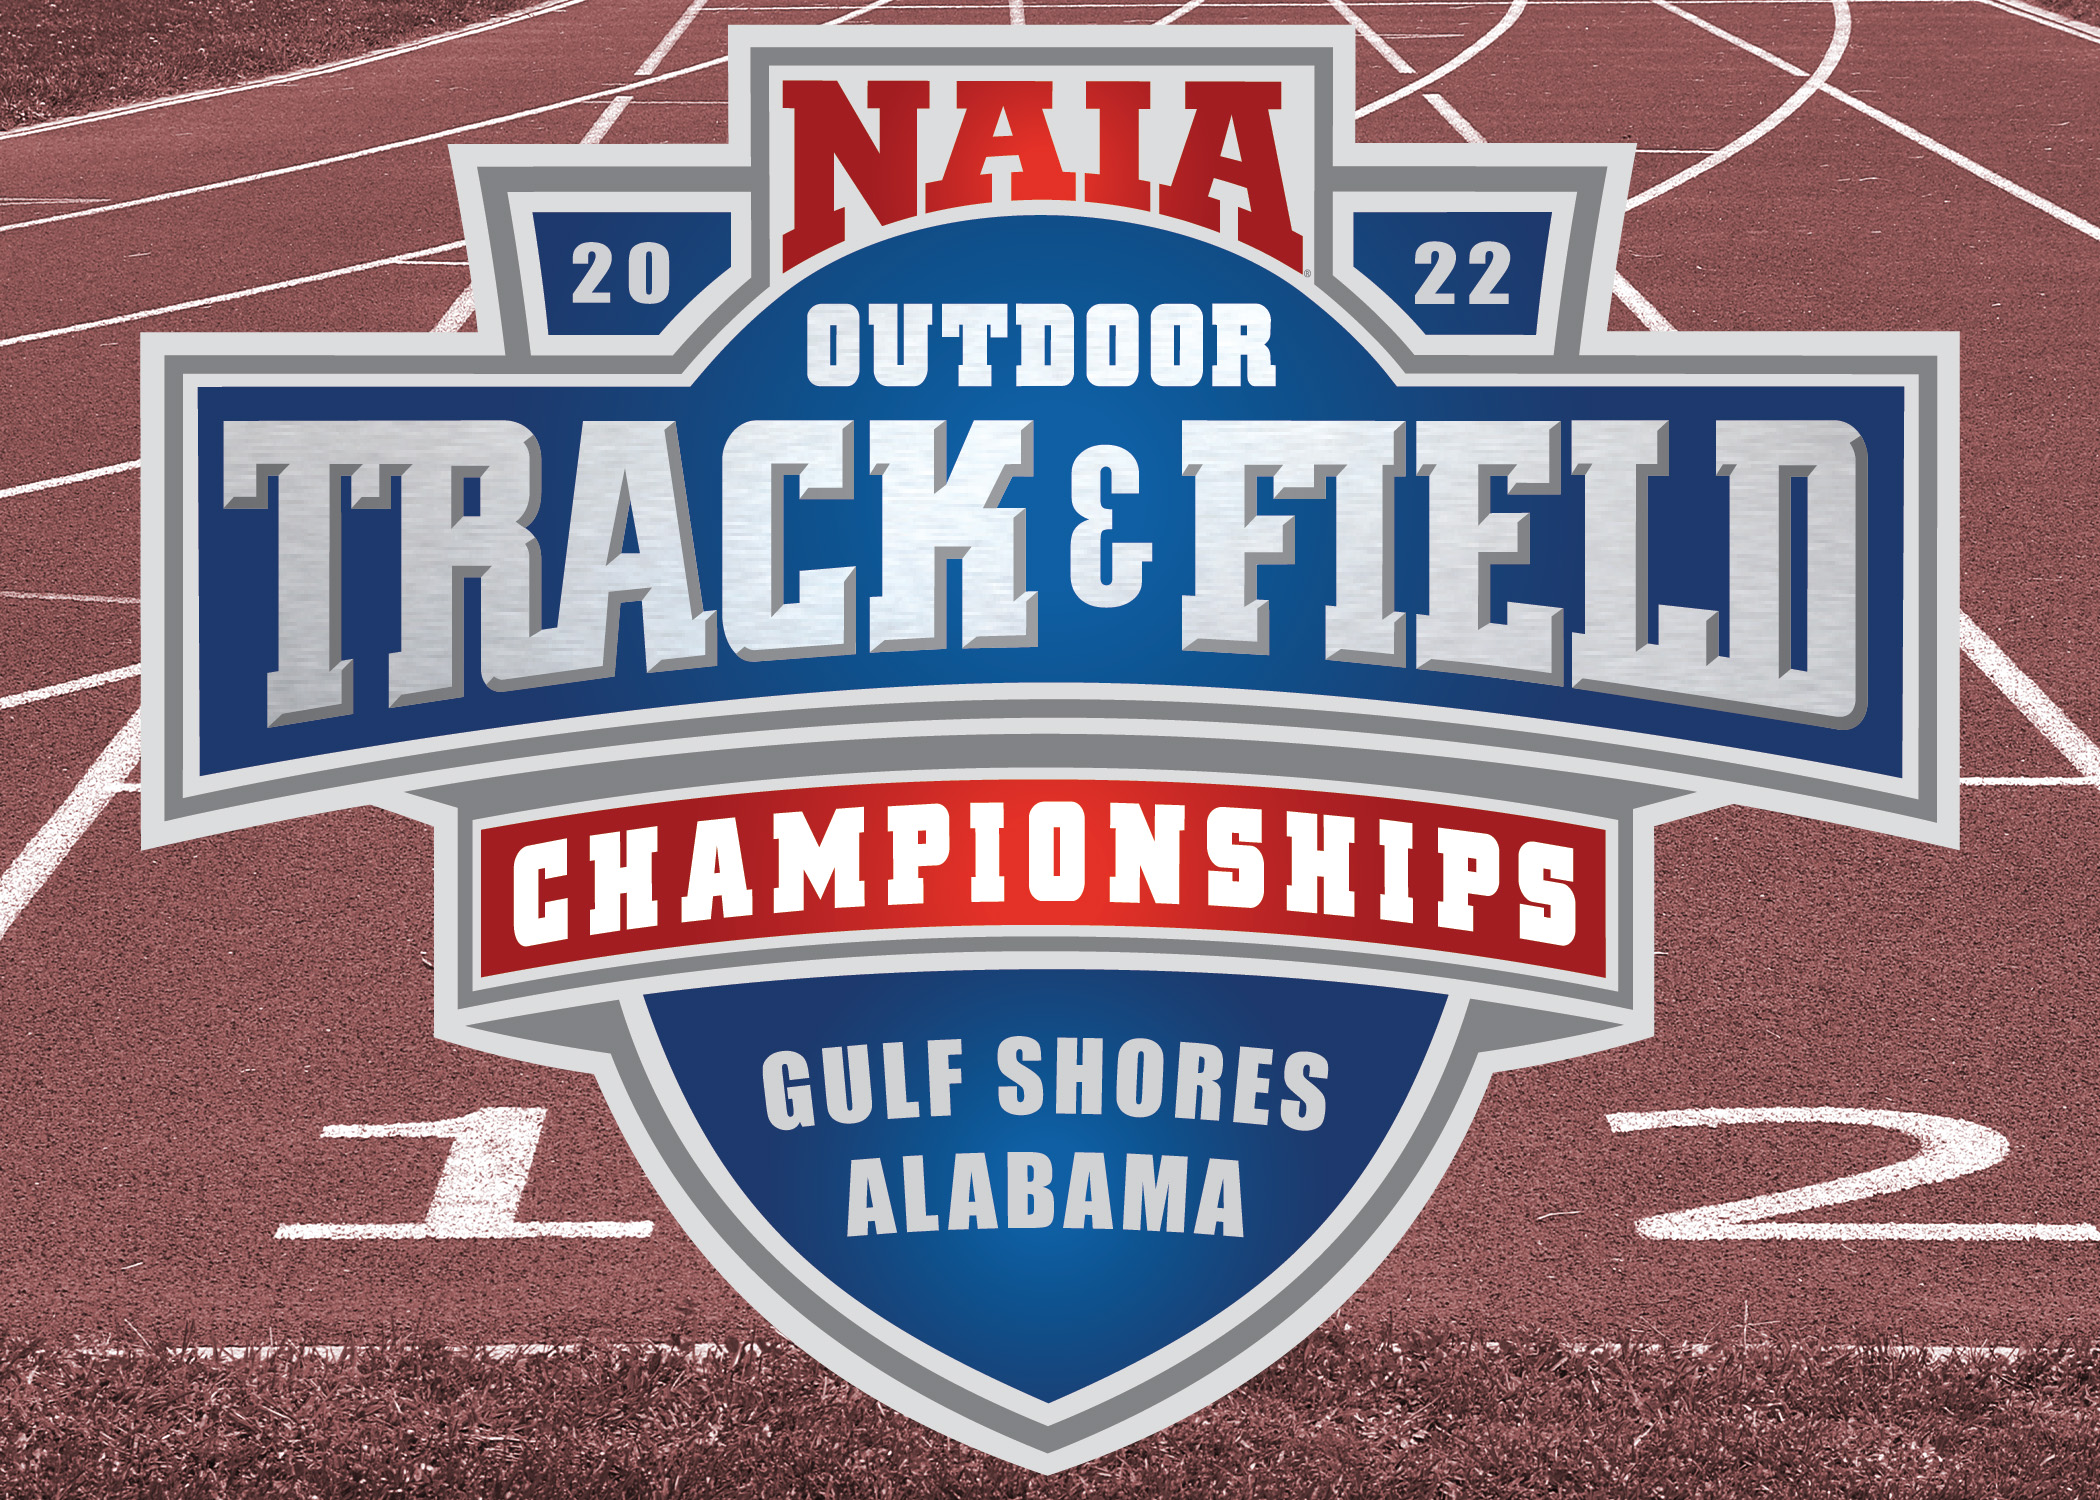 FHU to see three marathoners compete in National Championships